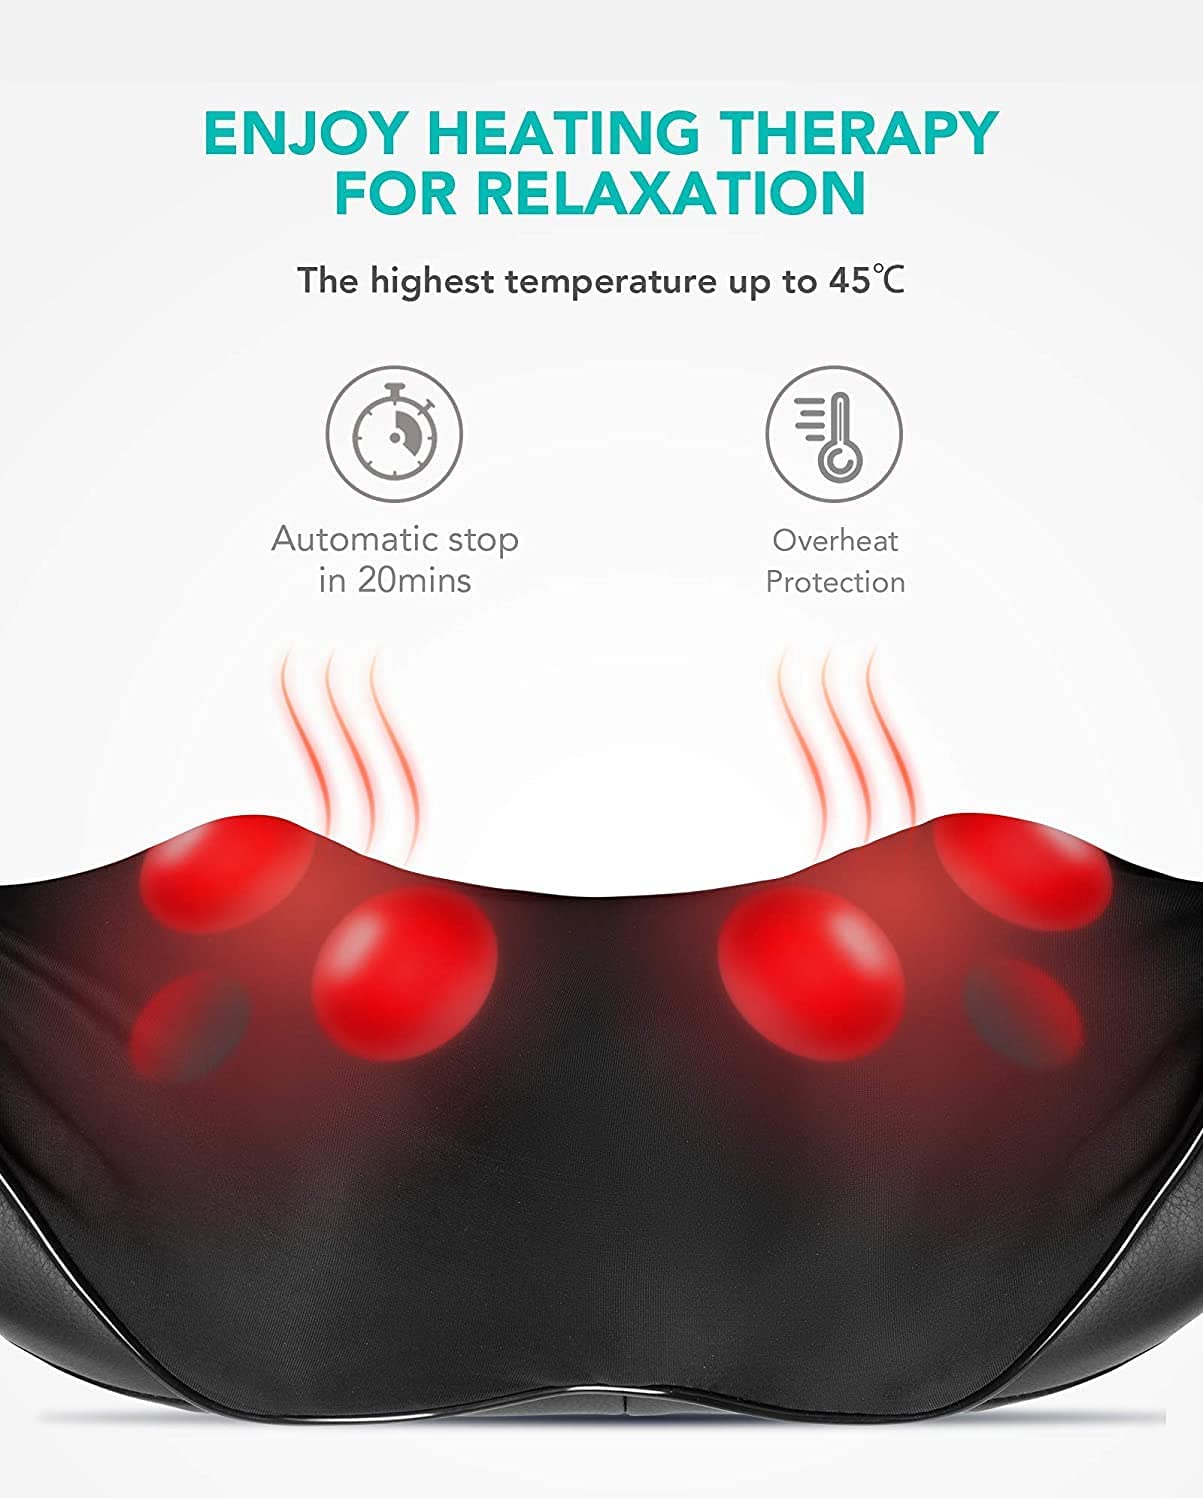 Naipo Shiatsu Back and Neck Massager with Heat, Praise the  Gods,  Because This Back and Neck Massager Is $34 For Black Friday